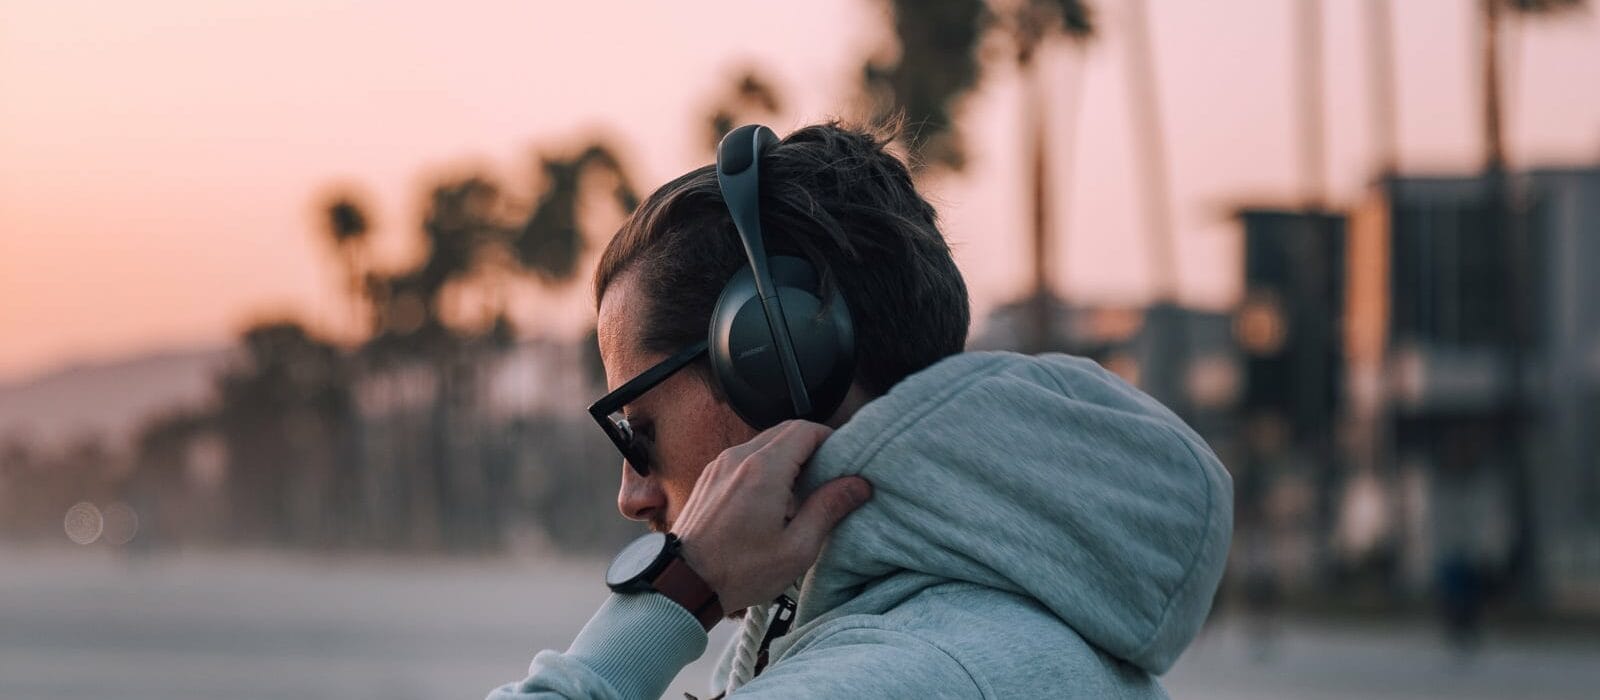 Bose 700 vs QC35 II: Which Noise Cancelling Headphones Are Better?